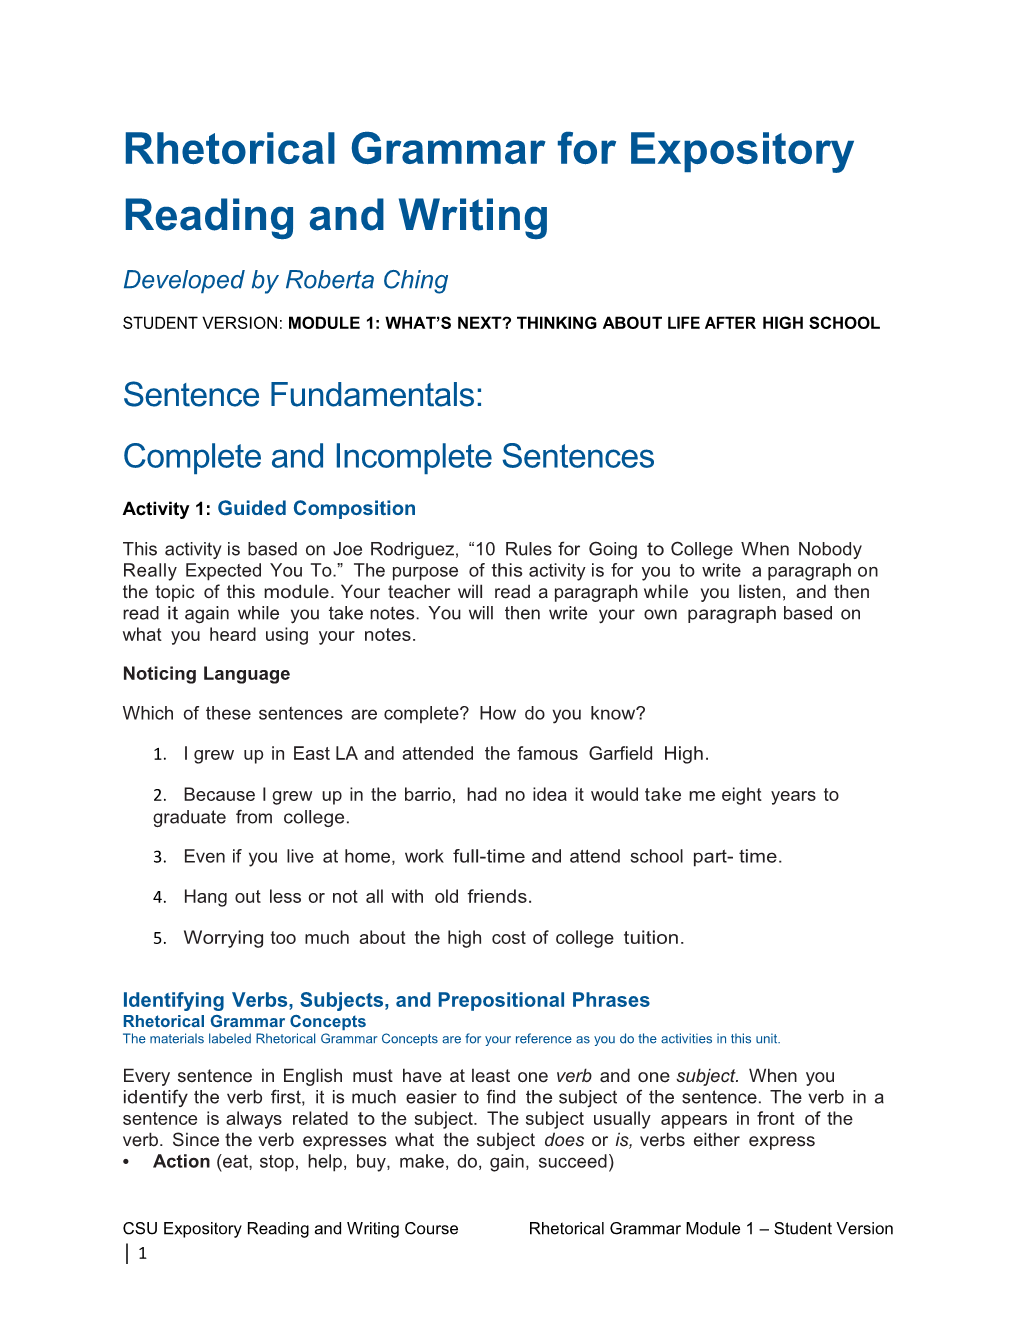 Rhetorical Grammar for Expository Reading and Writing